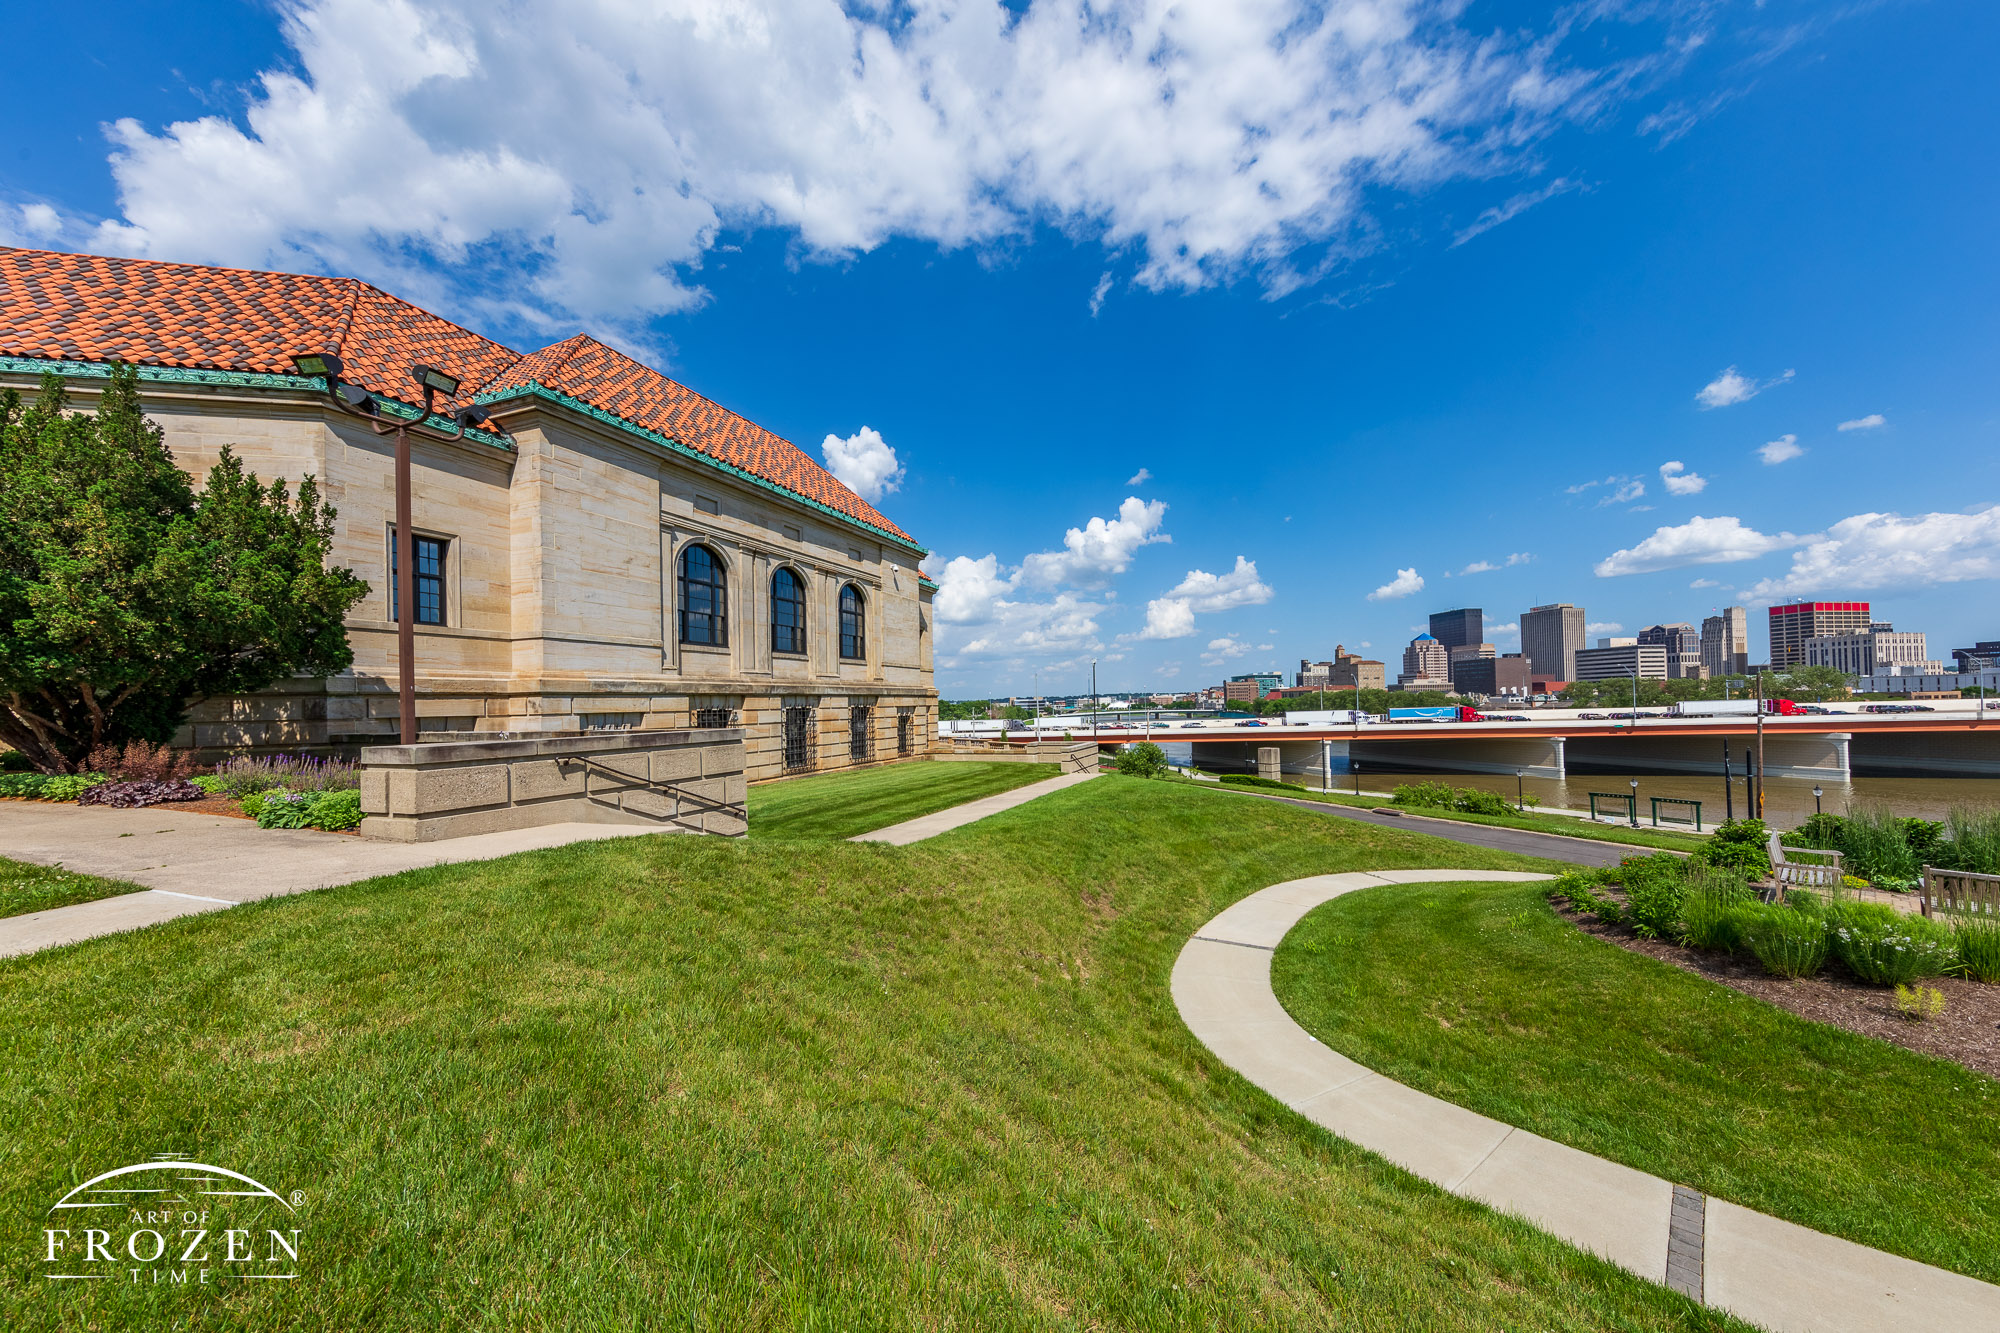 The facade of the Dayton Art Institute on a gorgeous June Day with the DAI and the Dayton Skyline basking in the sunlight as clumulous clouds float through the blue sky